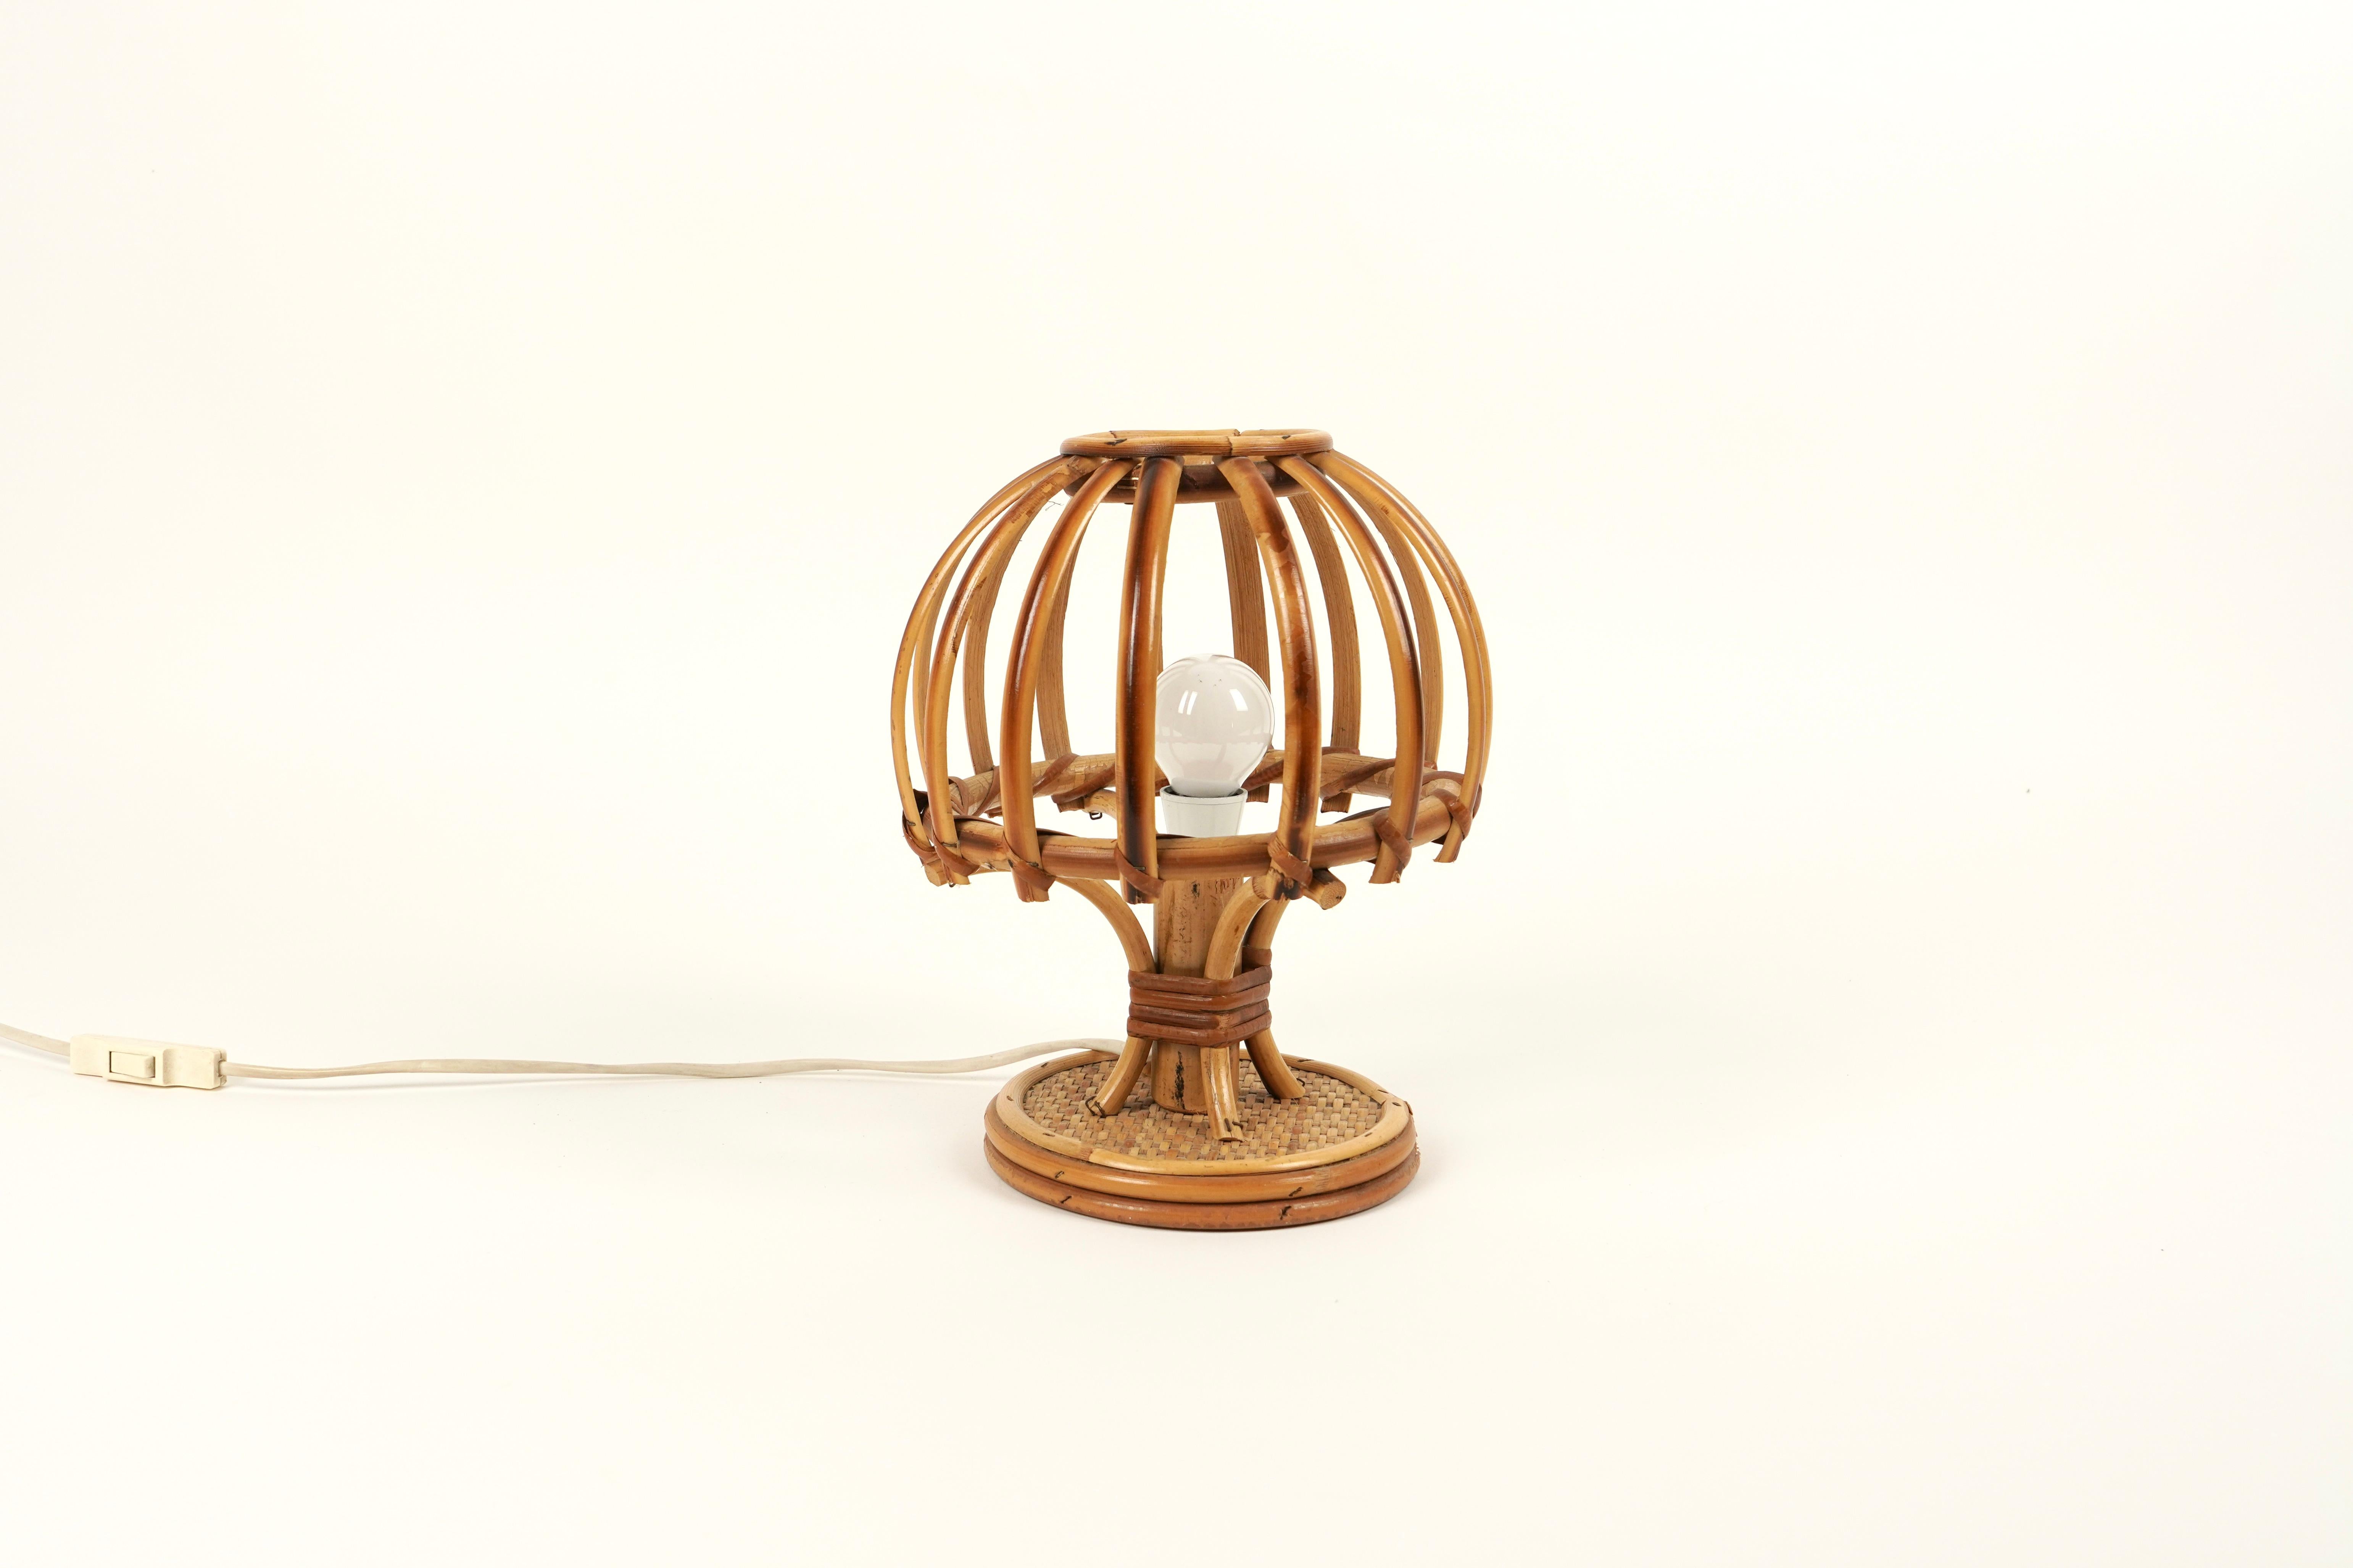 Midcentury Bamboo and Rattan Pair of Table Lamps Louis Sognot Style Italy, 1970s For Sale 3